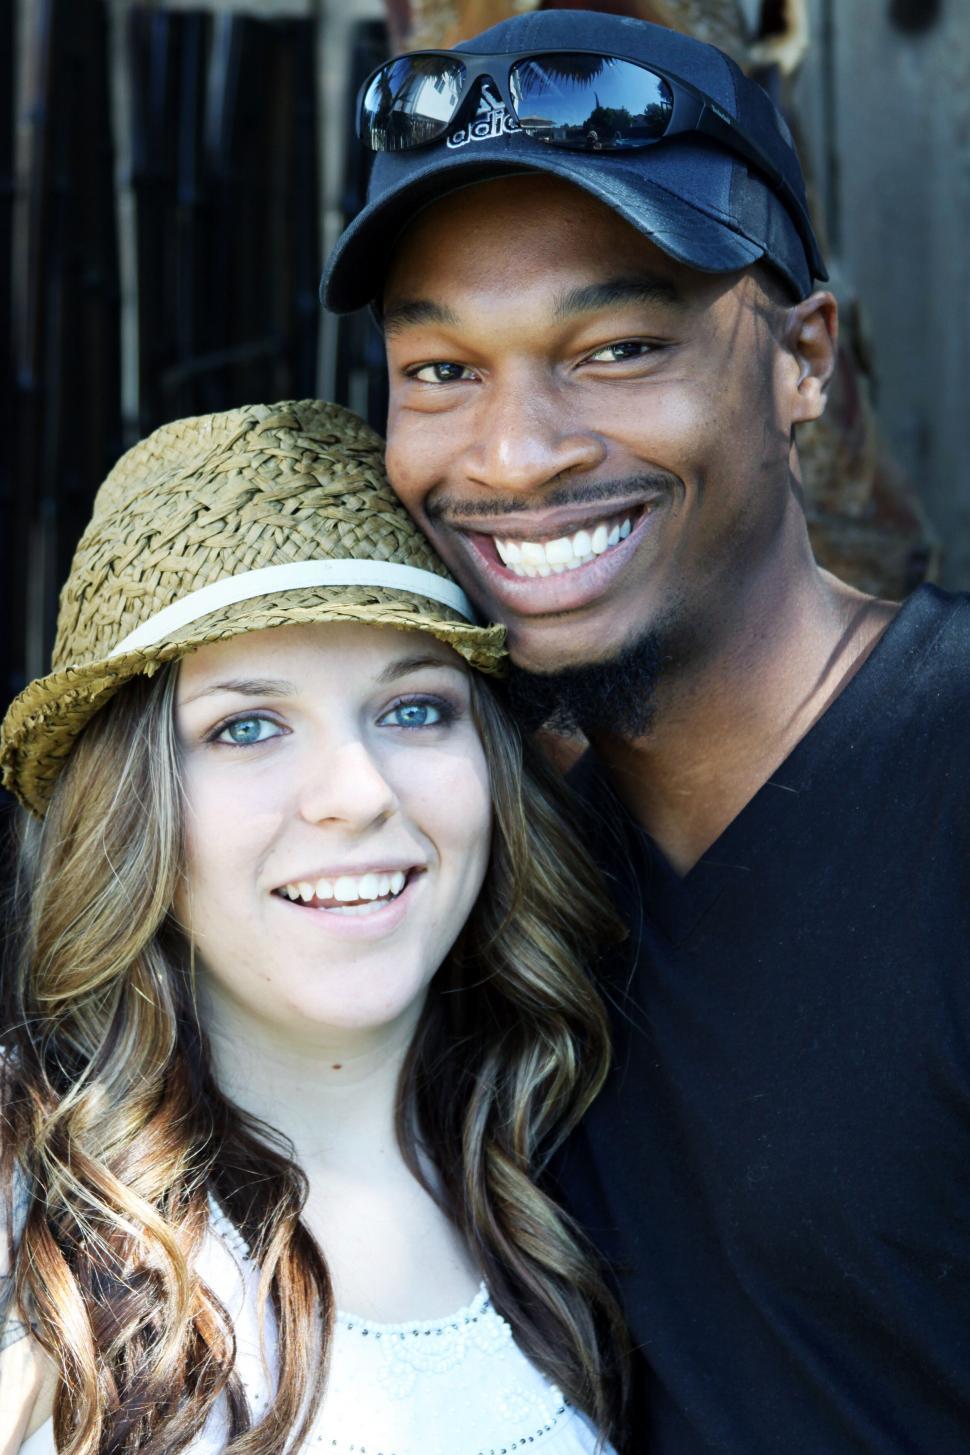 Free Image of Couple smiling with man wearing cap 